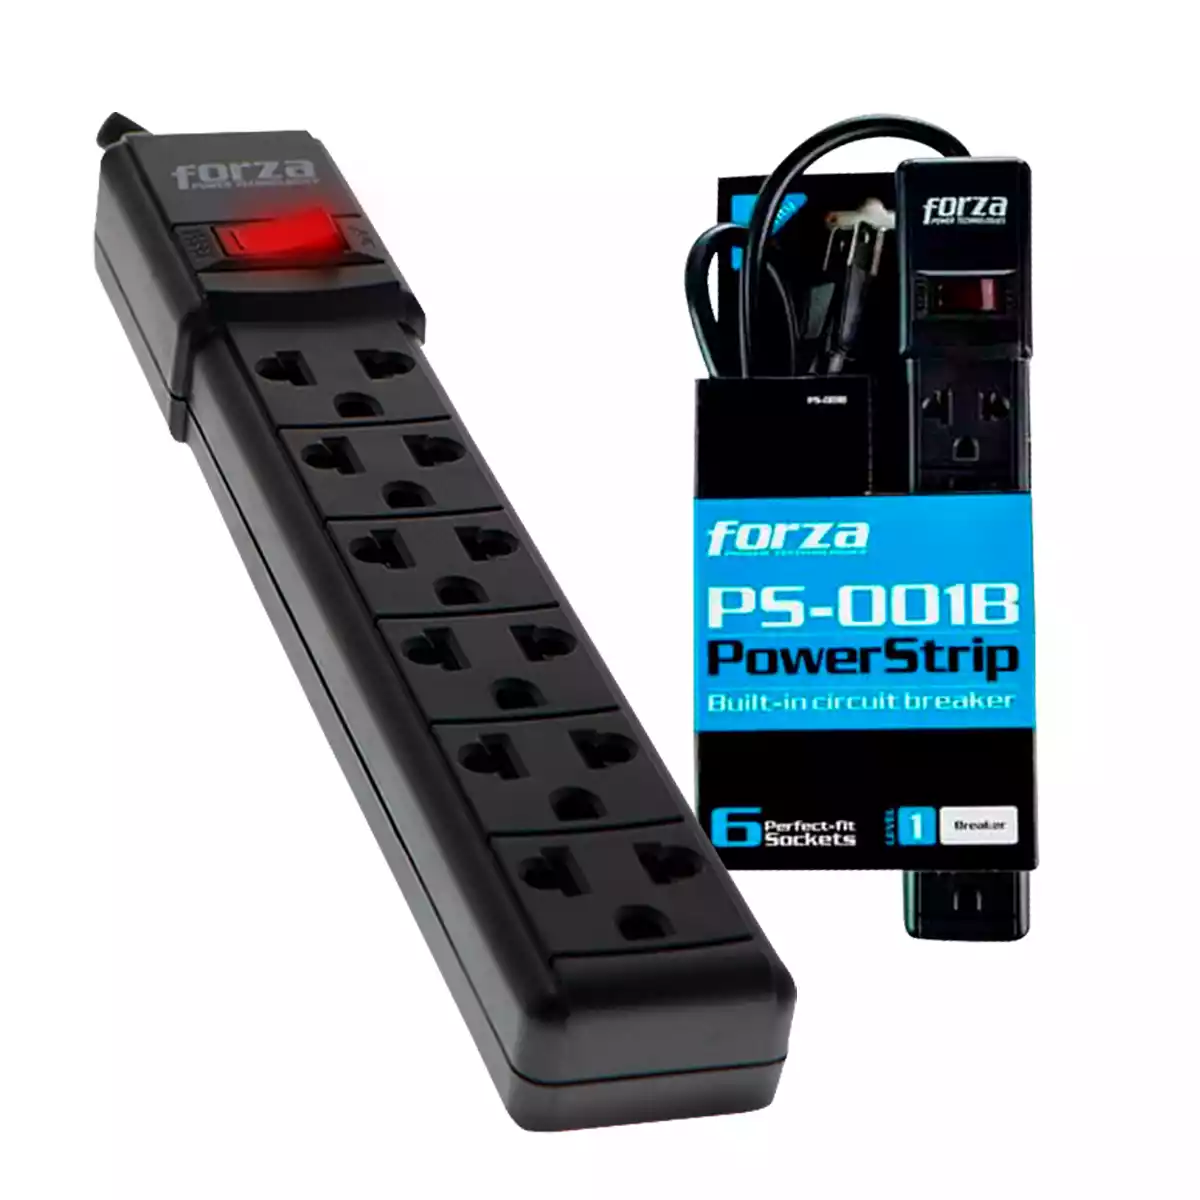 Forza Ps-001B power strip built in circuit 6 sockets